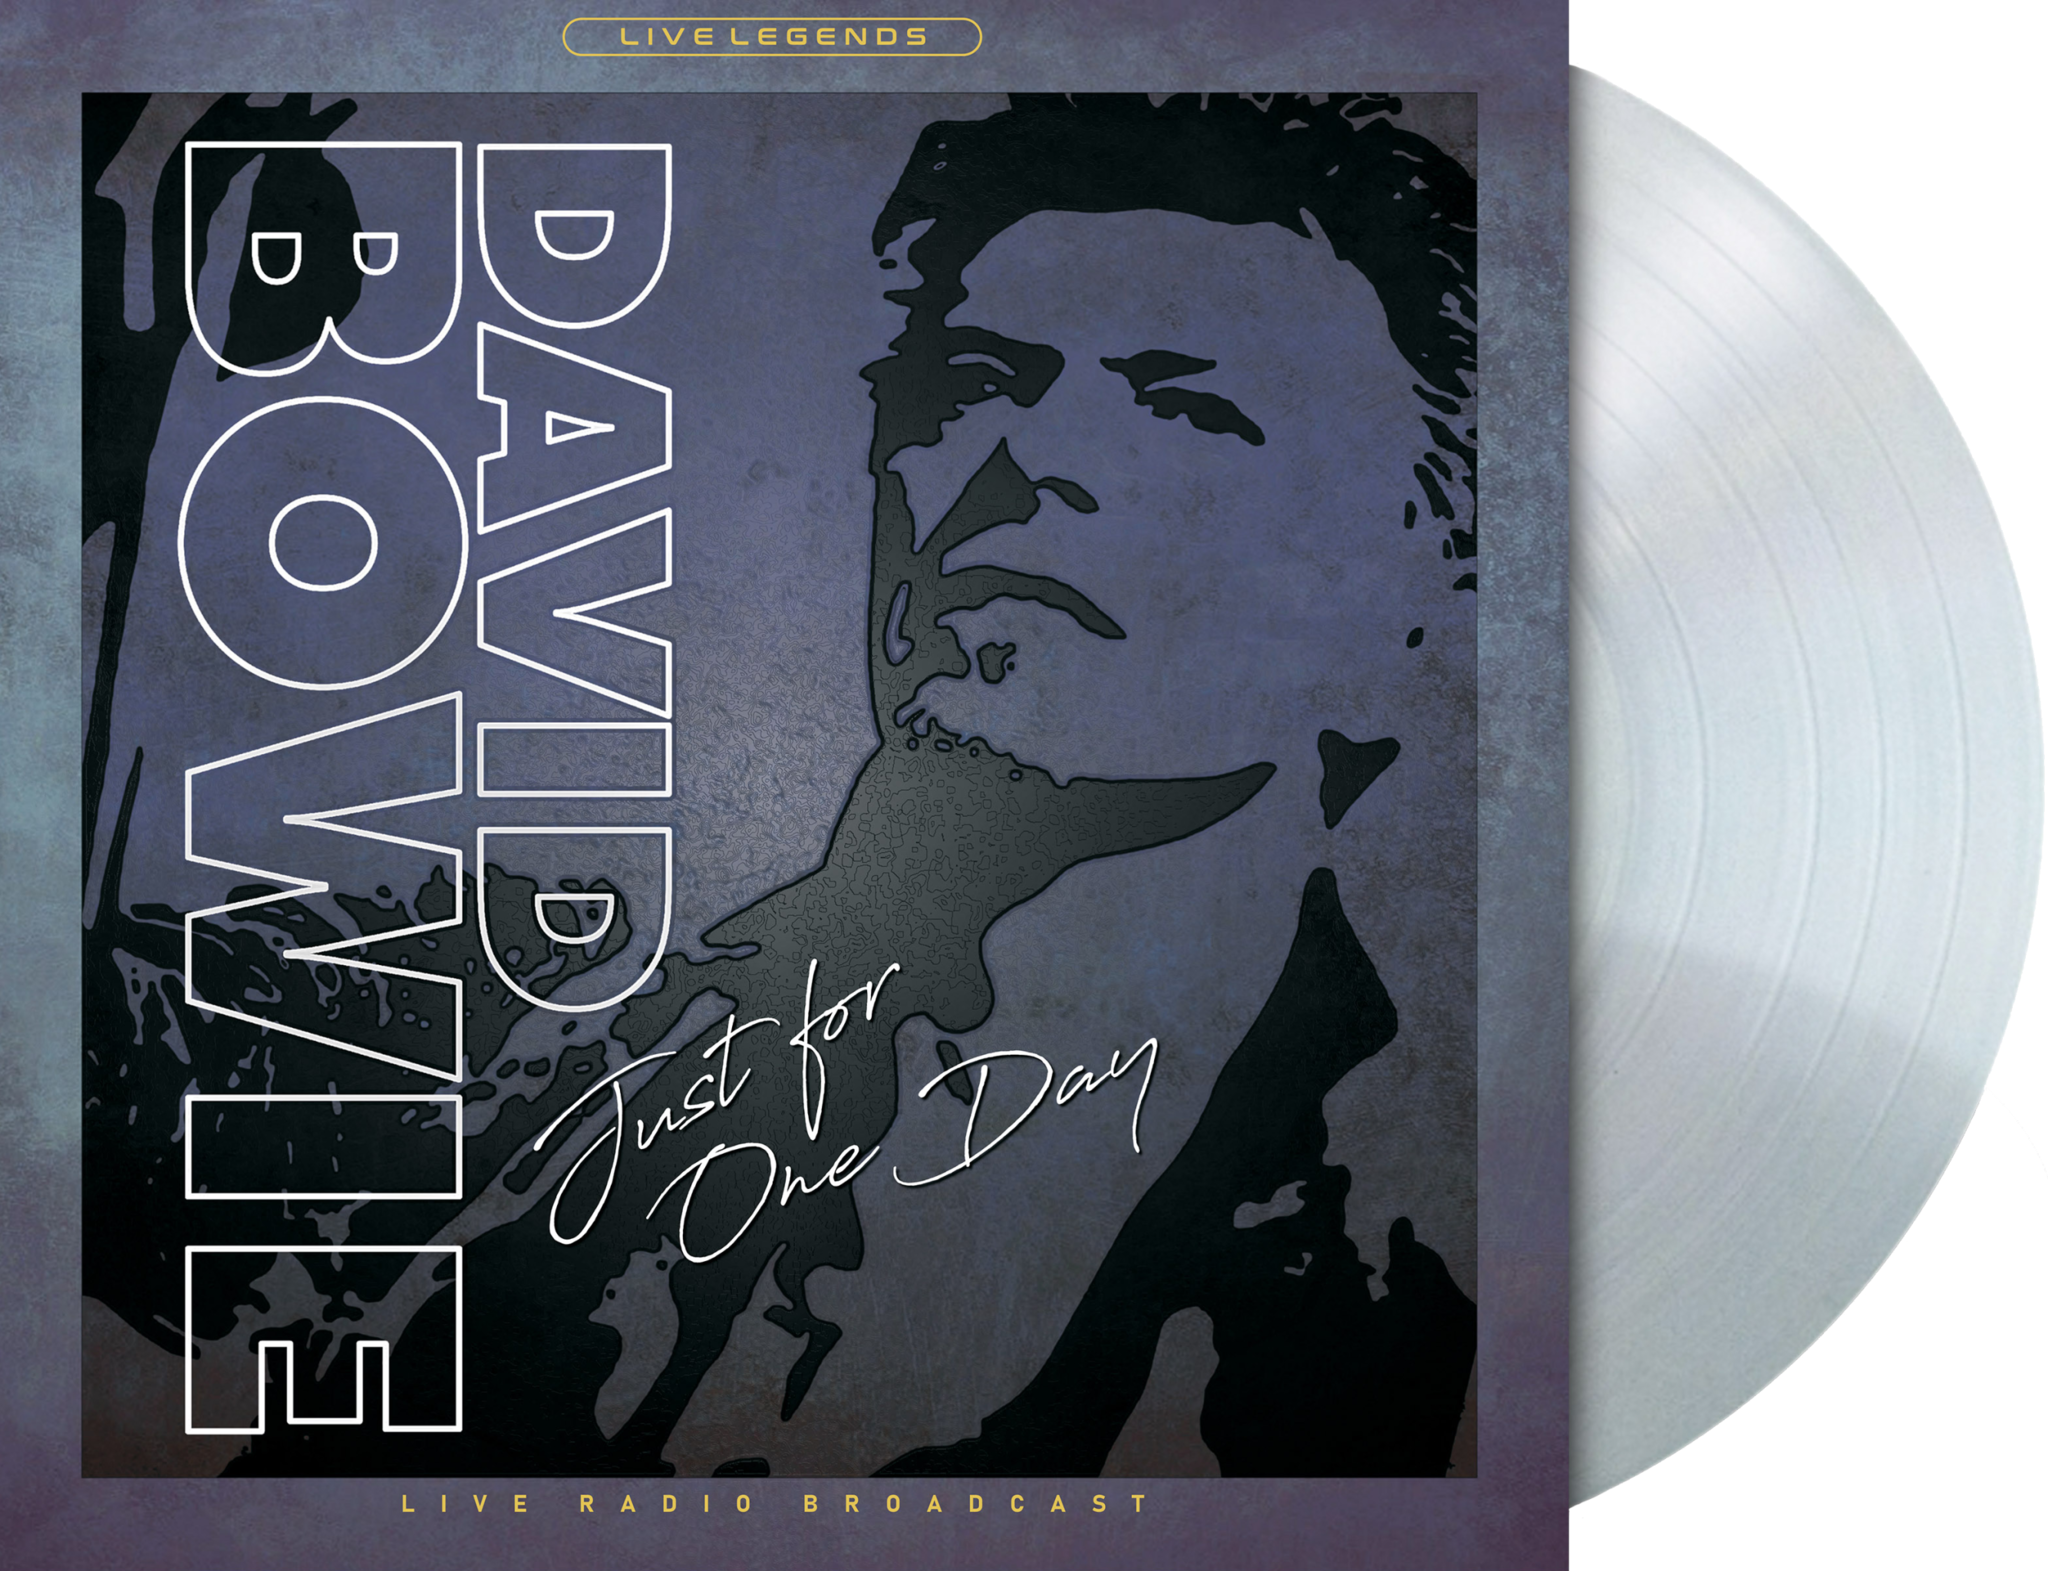 Album artwork for Just For One Day - Live Radio Broadcast by David Bowie